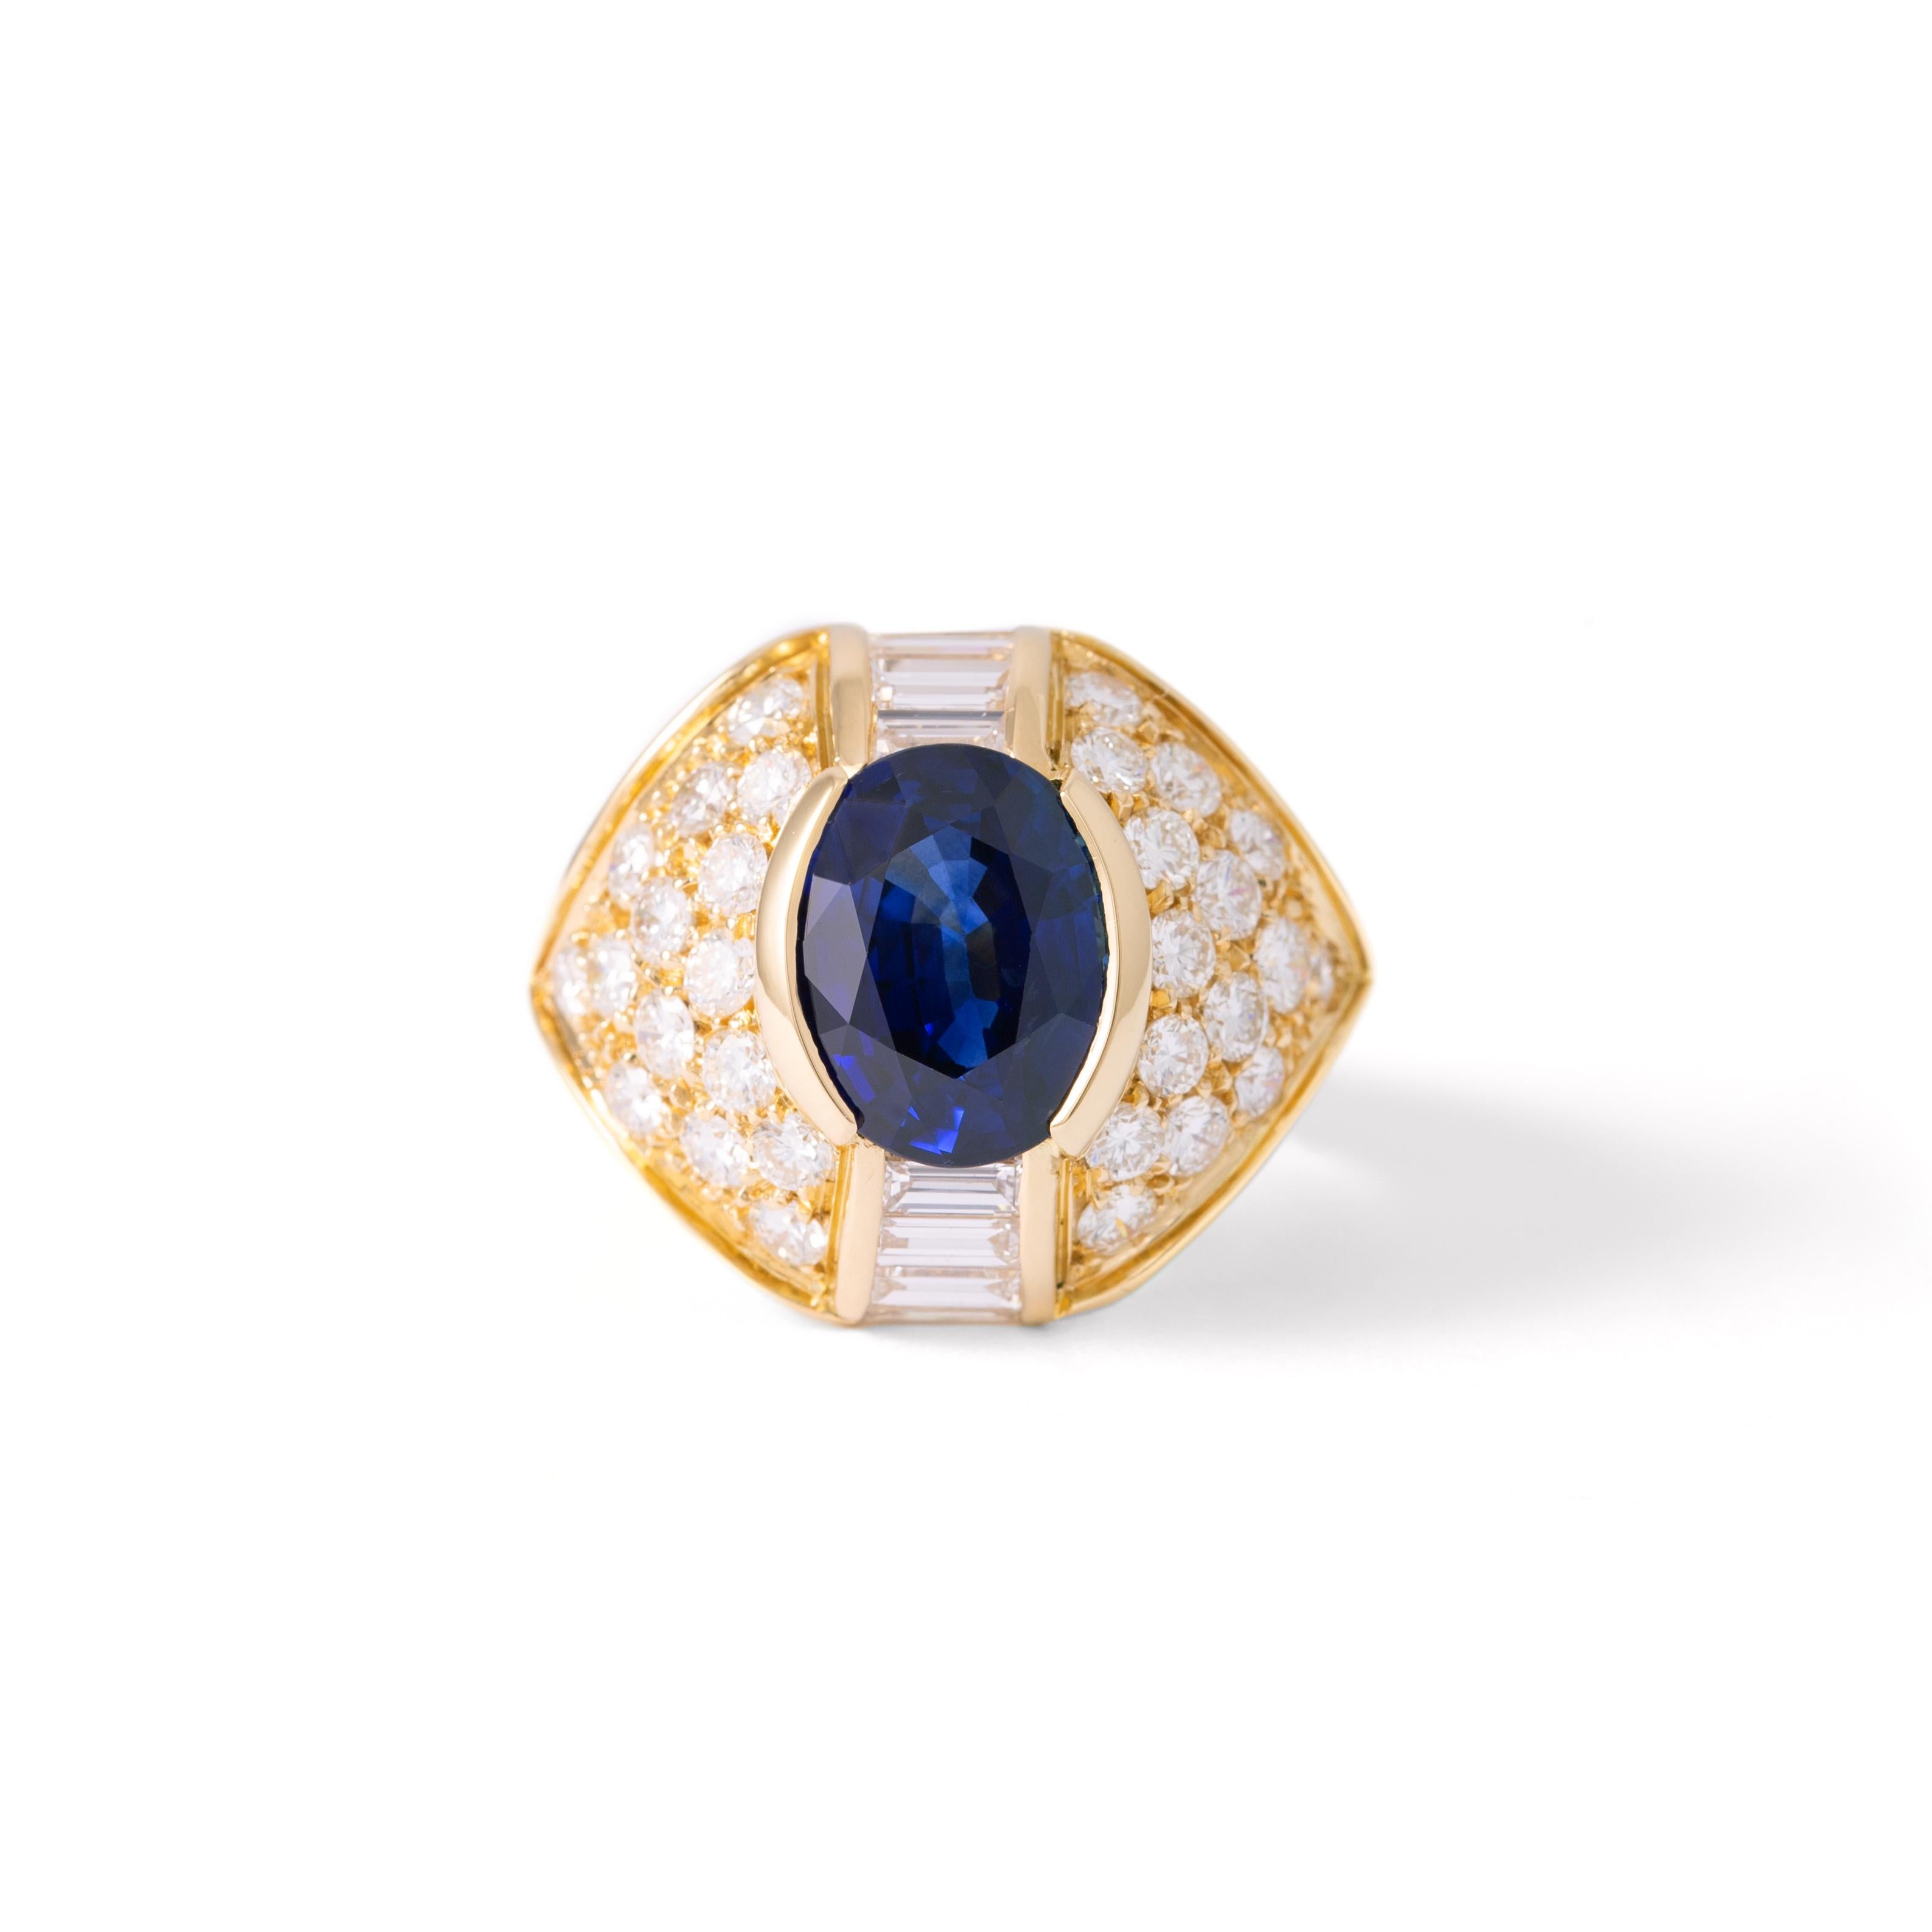 Ring in 18kt yellow gold set with one oval sapphire 3.51 cts and round and tapers diamonds 1.85 cts, Size 51